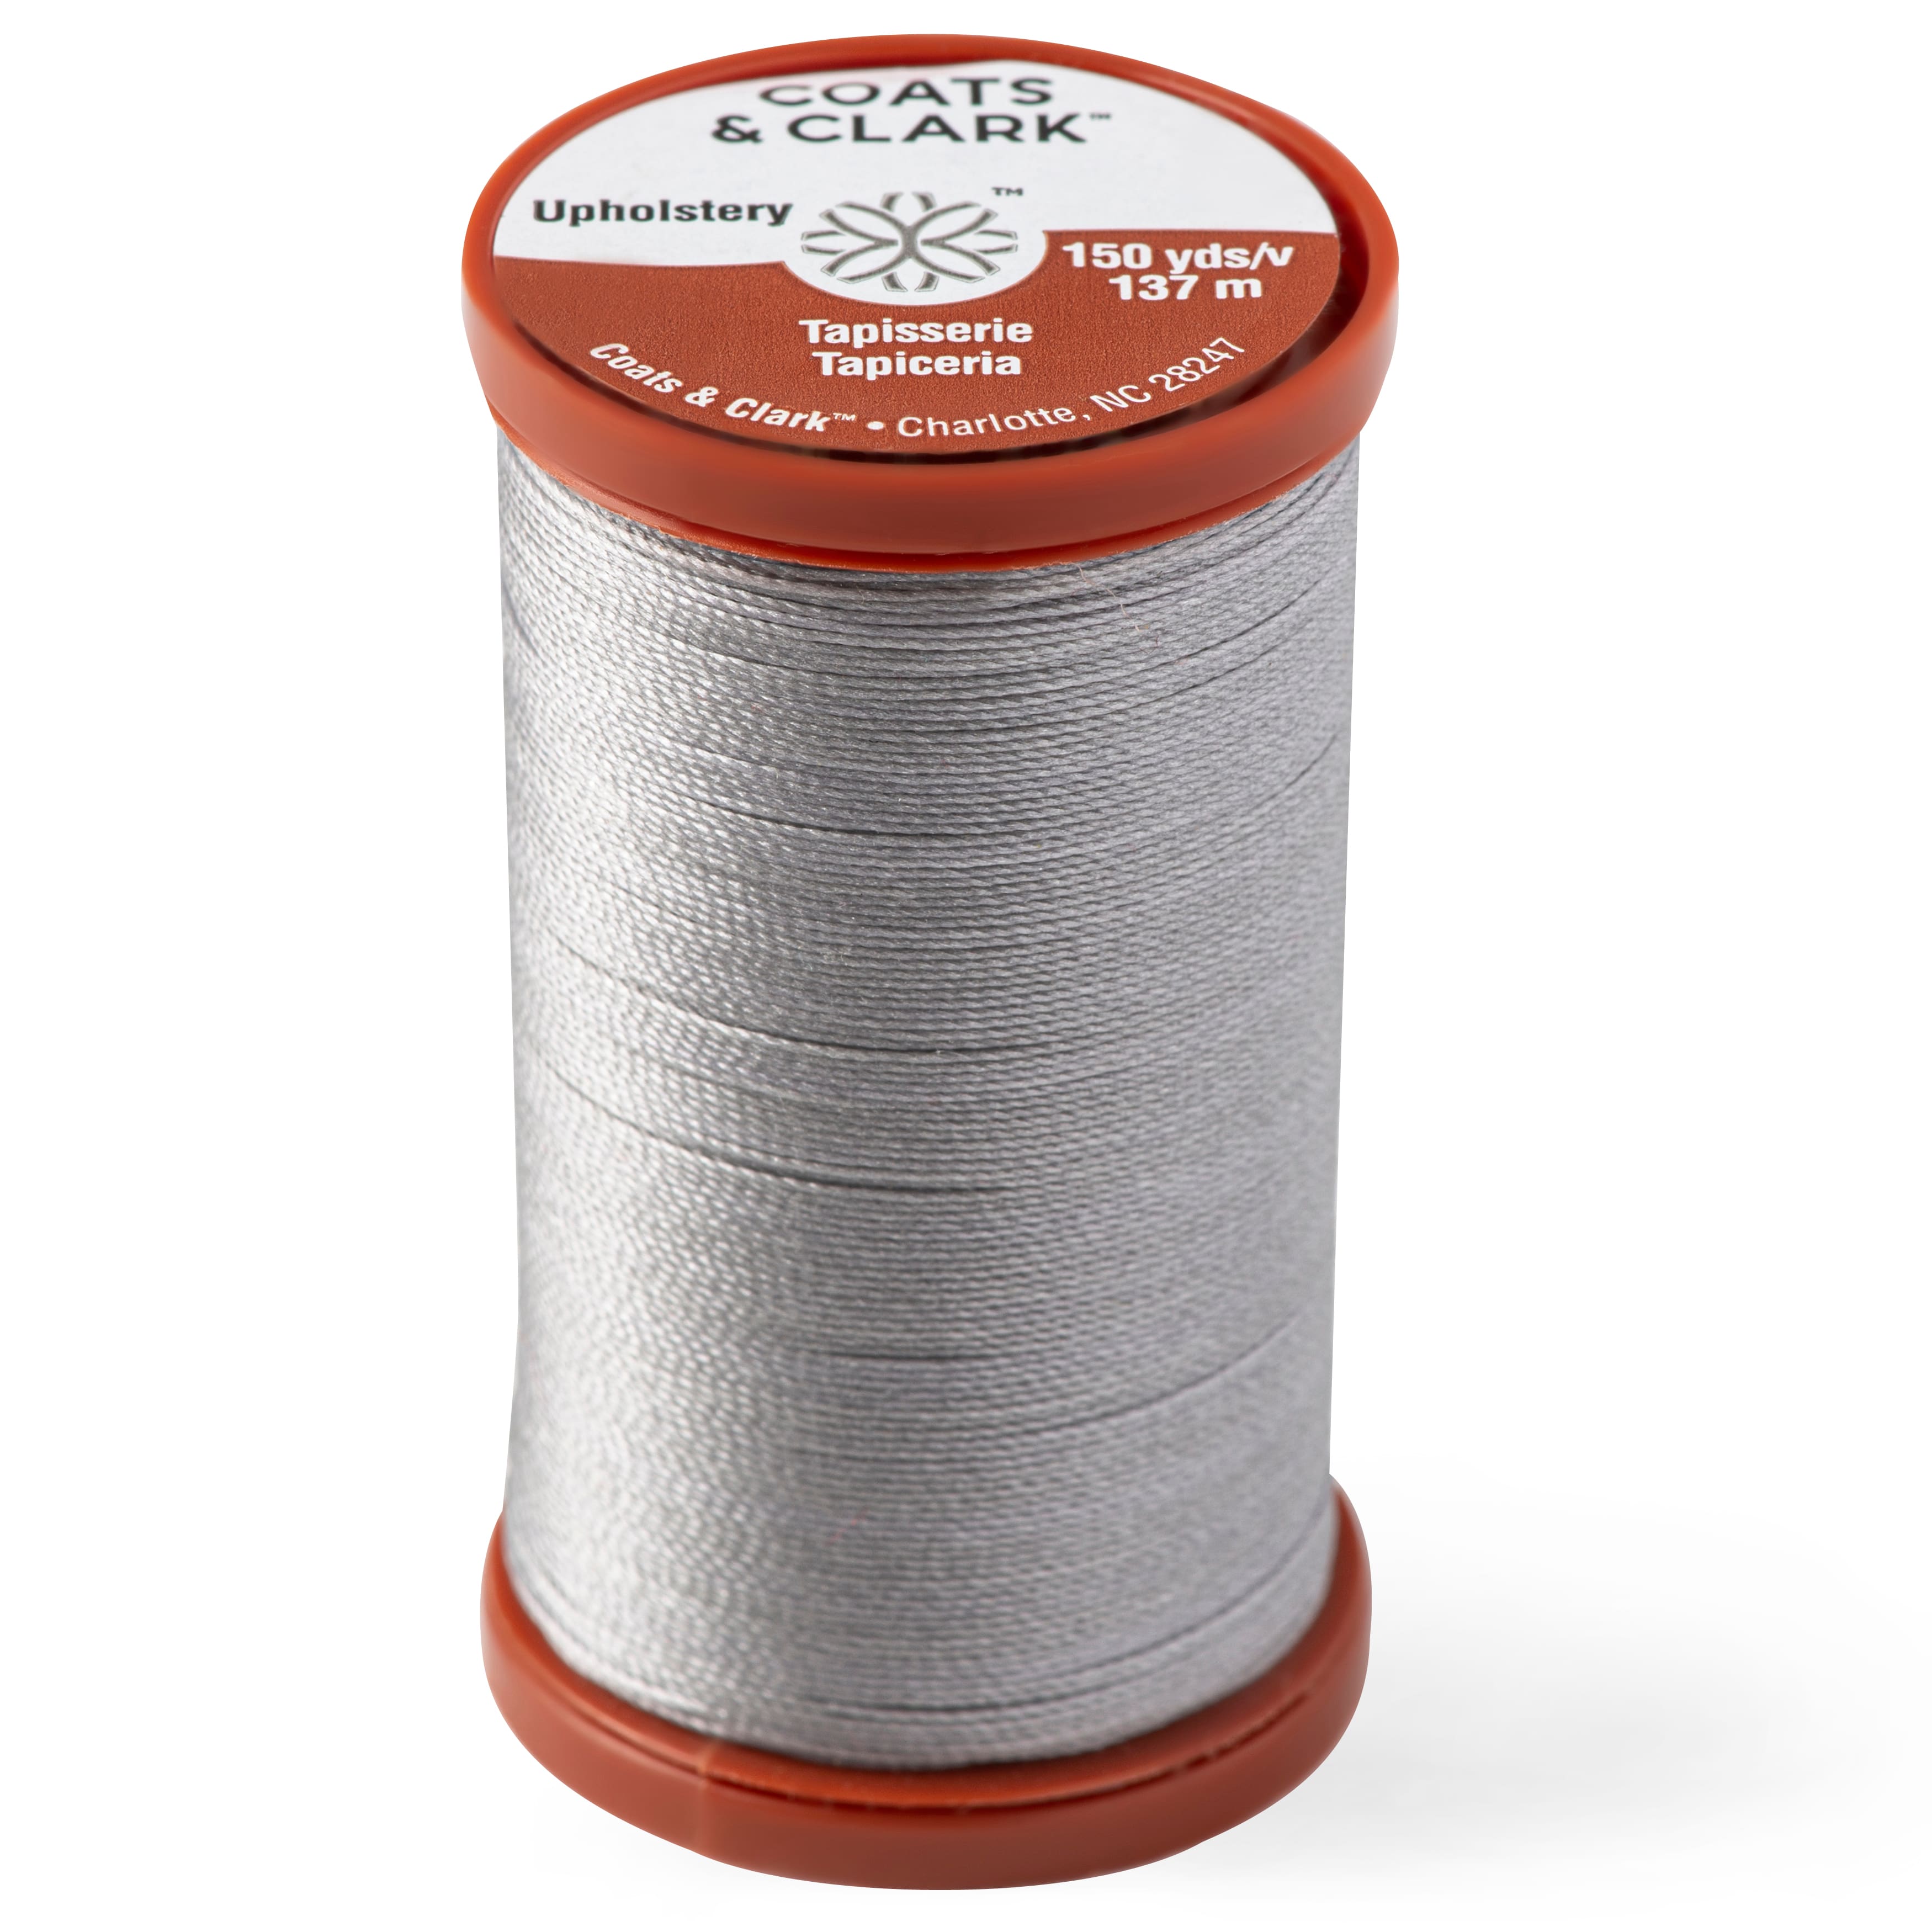 Coats Extra Strong Upholstery Thread 150Yd-Red